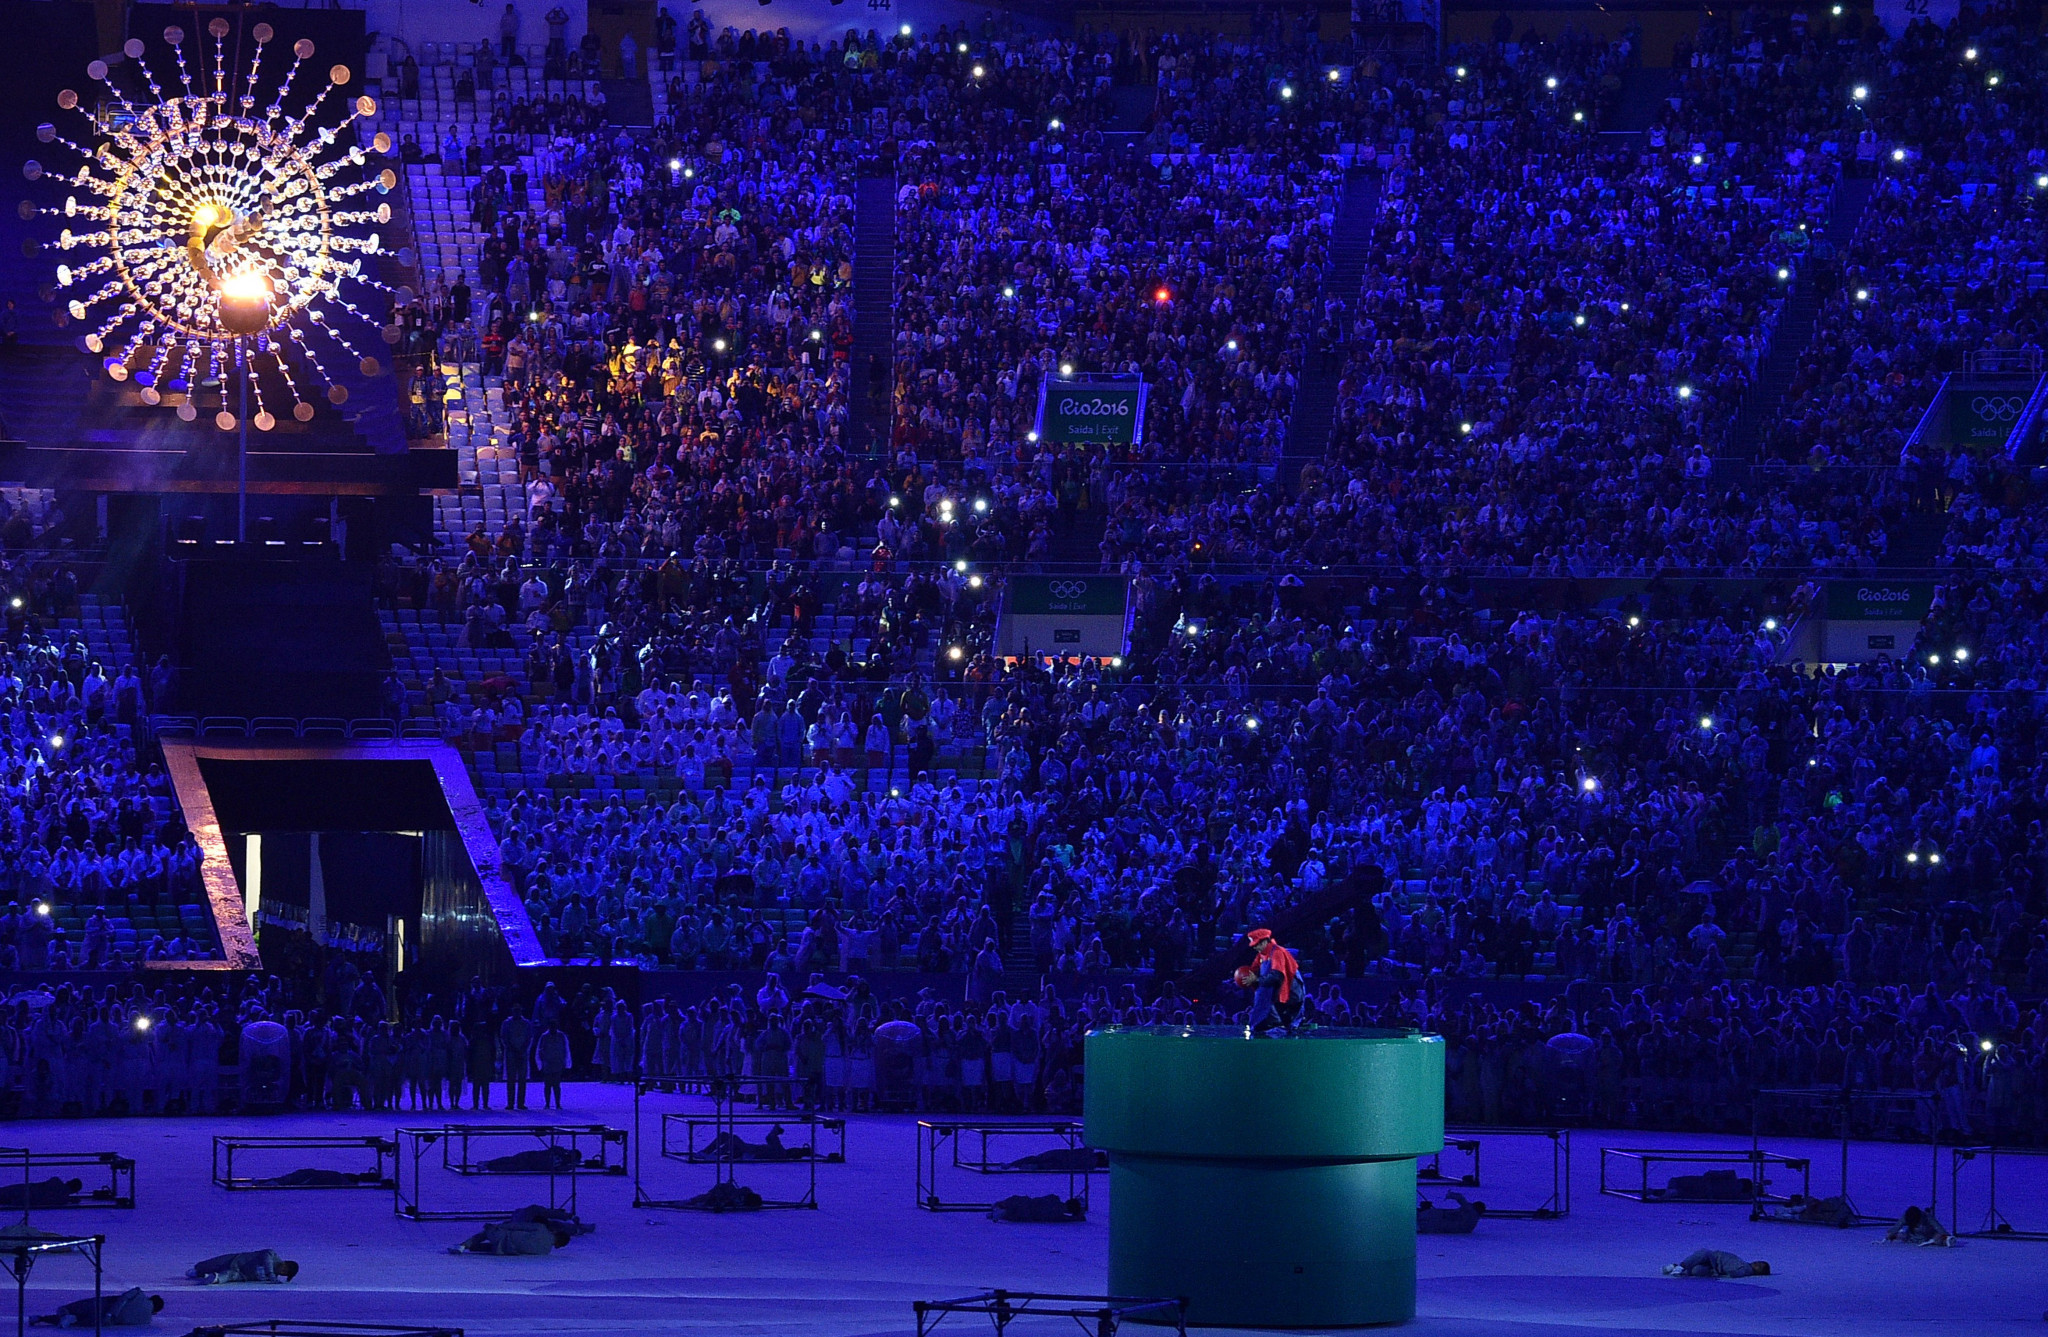 Kaoru Sugano worked on the handover segment at the Rio 2016 Closing Ceremony, where Japanese Prime Minister Shinzō Abe appeared as Mario ©Getty Images